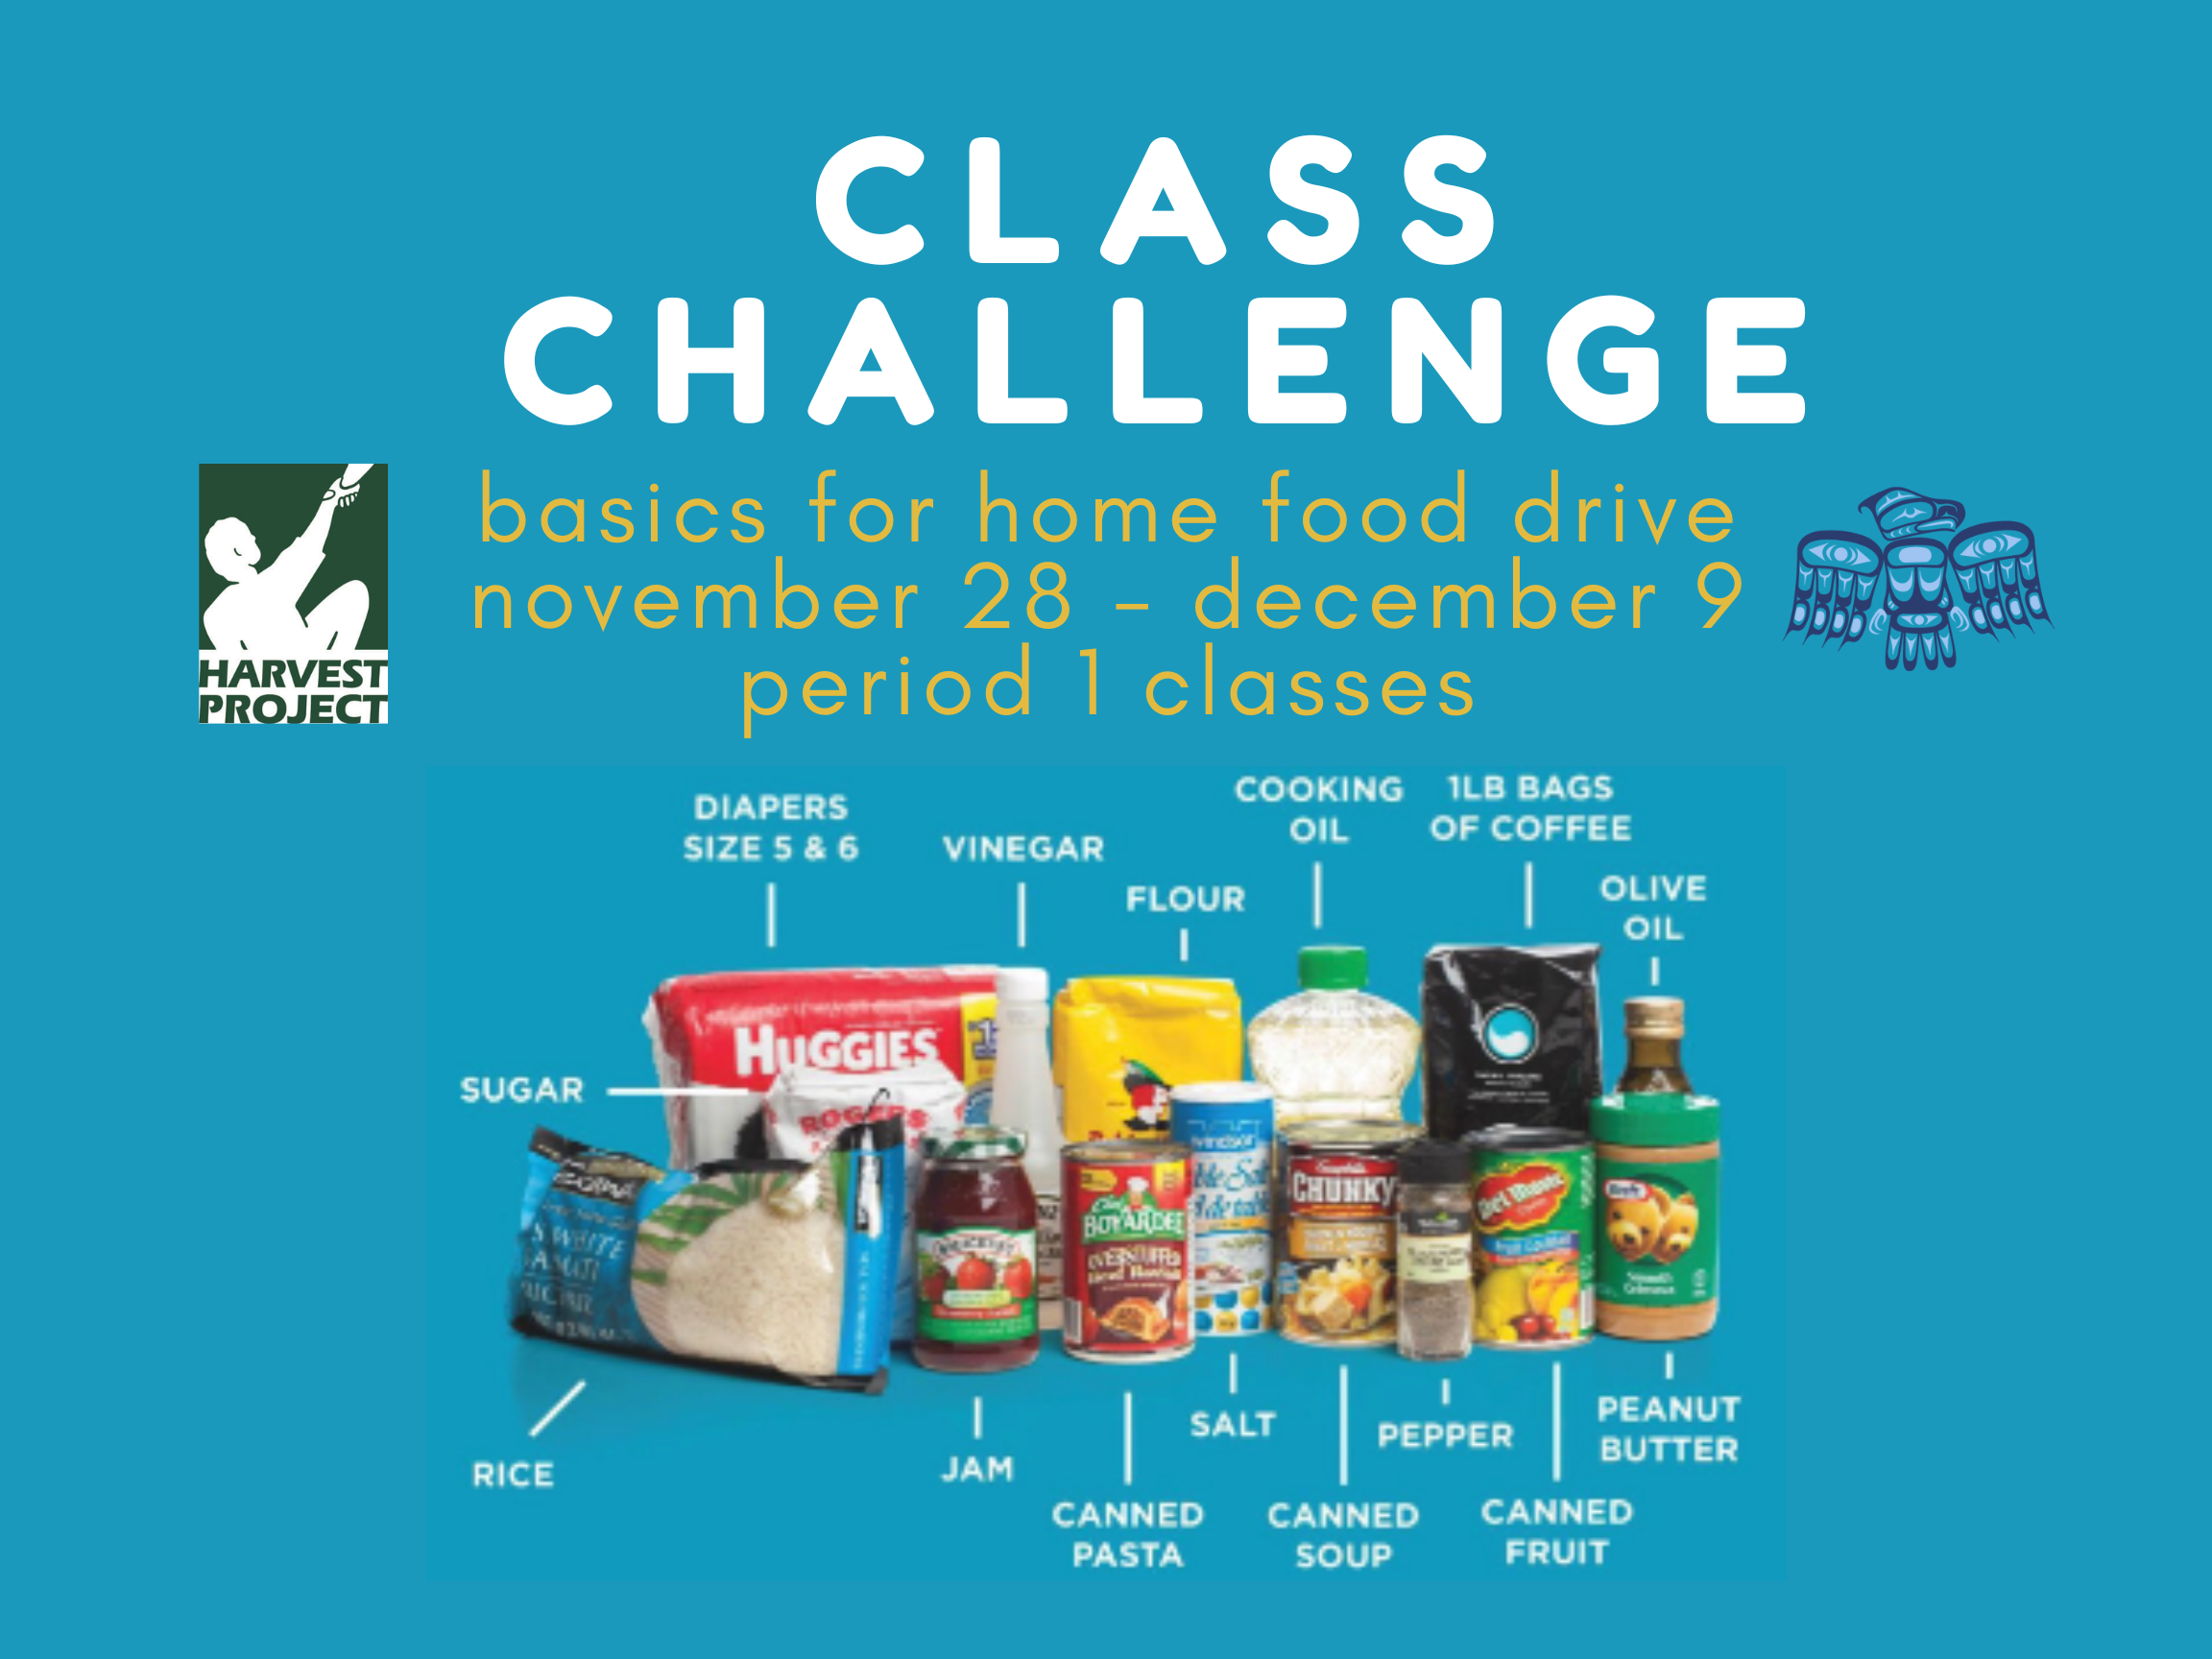 Class Challenge - Food Drive for the Harvest Project